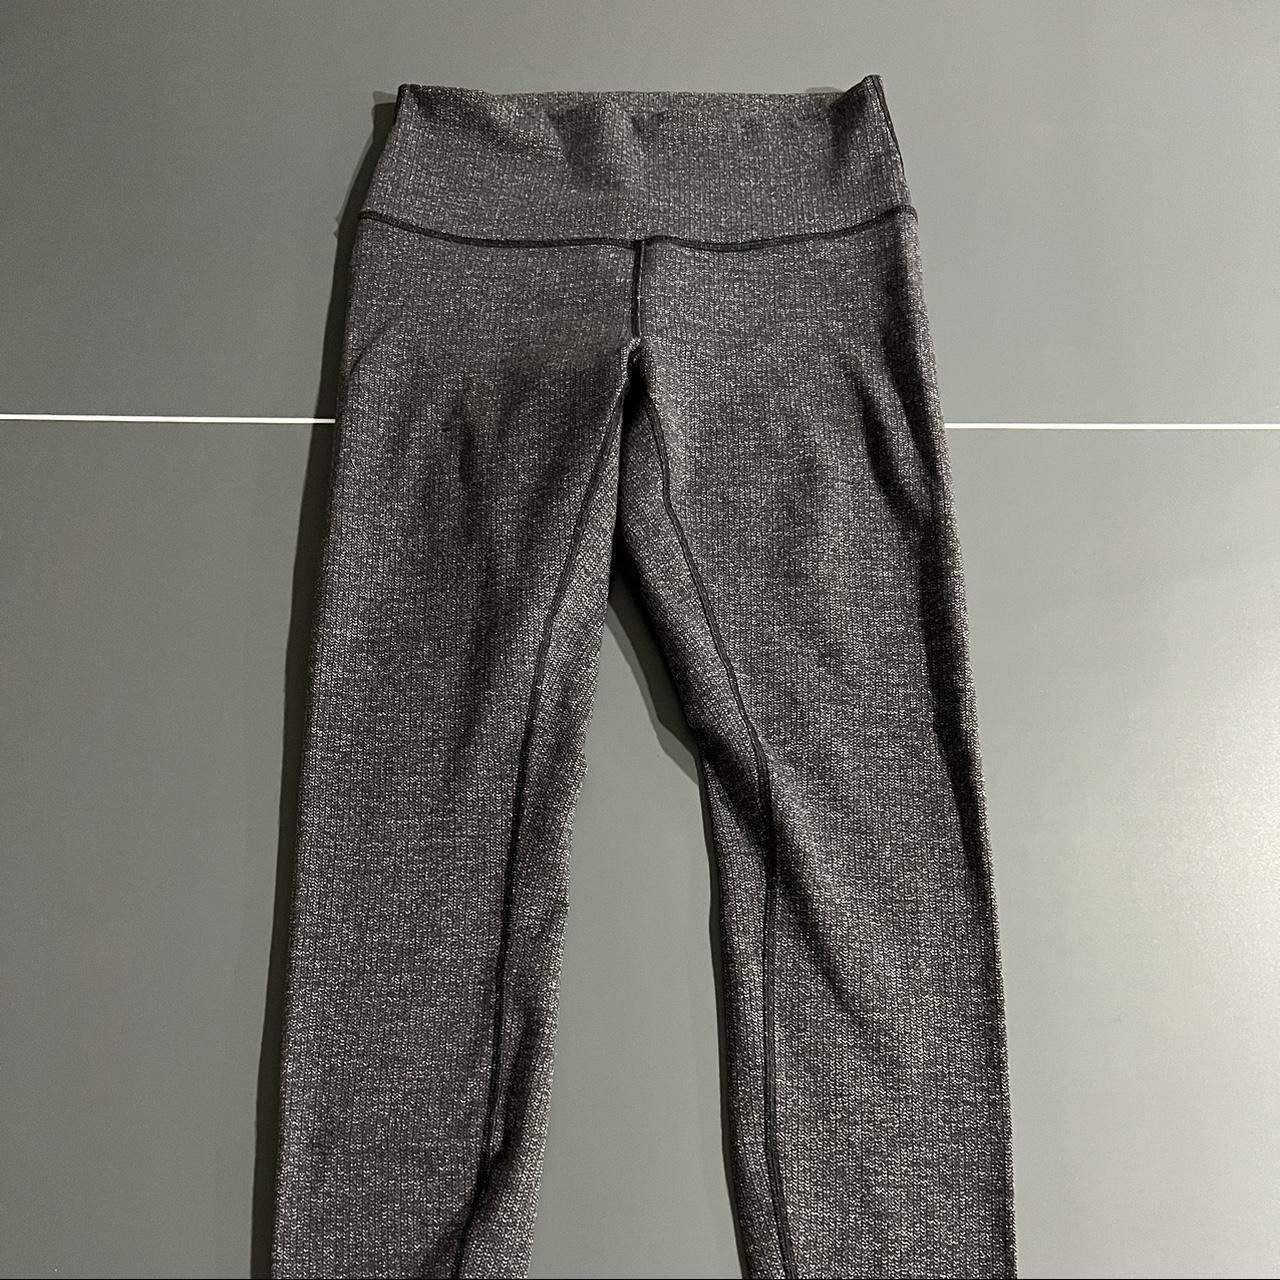 lululemon knit leggings size 8. perfect for fall and